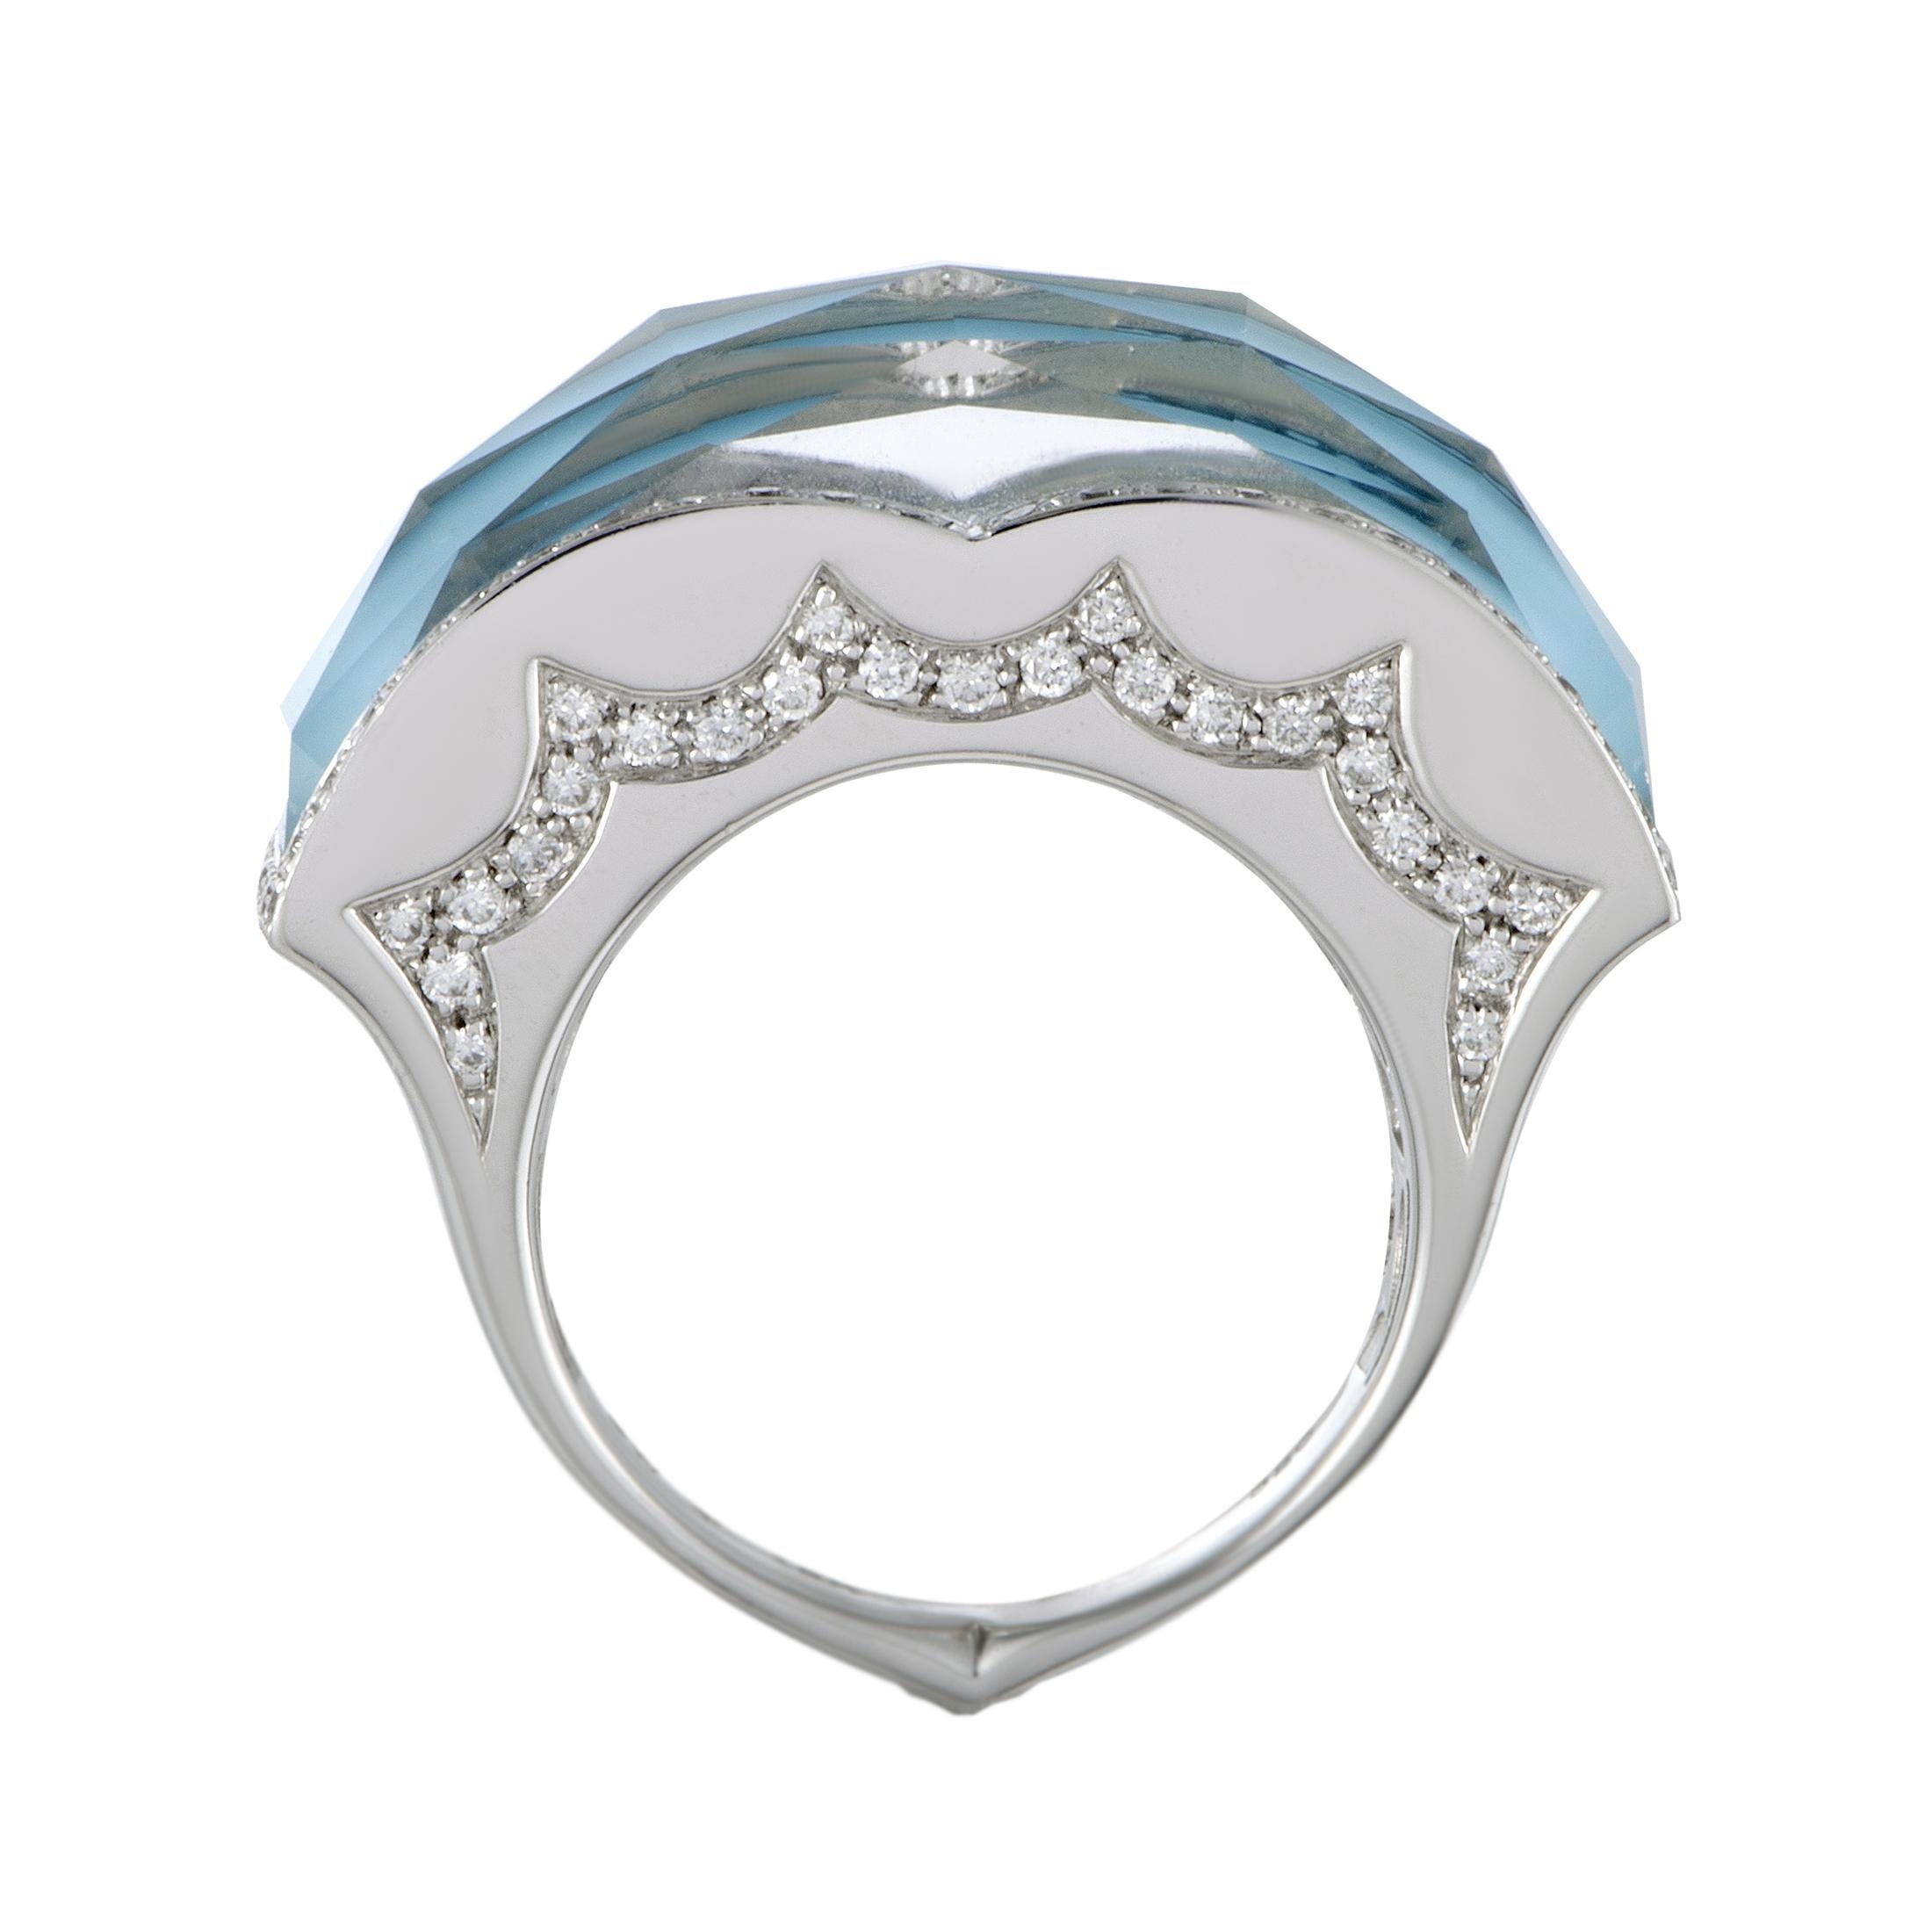 Exceptionally elegant, tastefully designed, and exquisitely executed, this magnificent “Crystal Haze” ring from Stephen Webster is a remarkable expression of the famous brand’s renowned expertise and enticing style, creating a fantastically